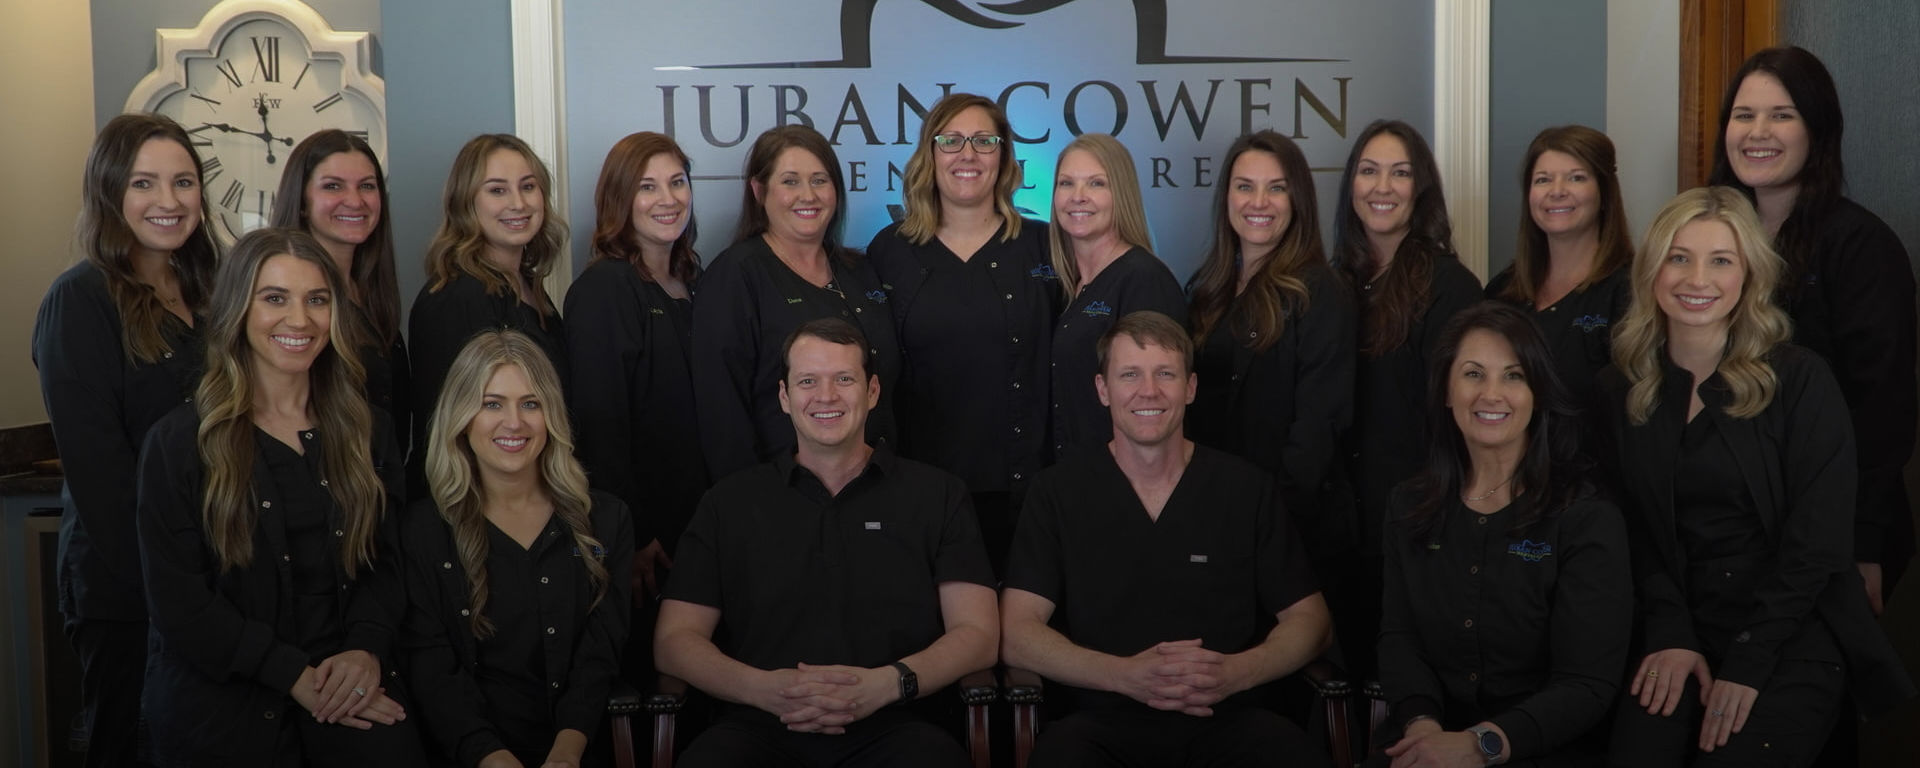 Experience Exceptional Dental Care at Juban Cowen Dental Care in Baton Rouge, LA Baton Rouge, LA